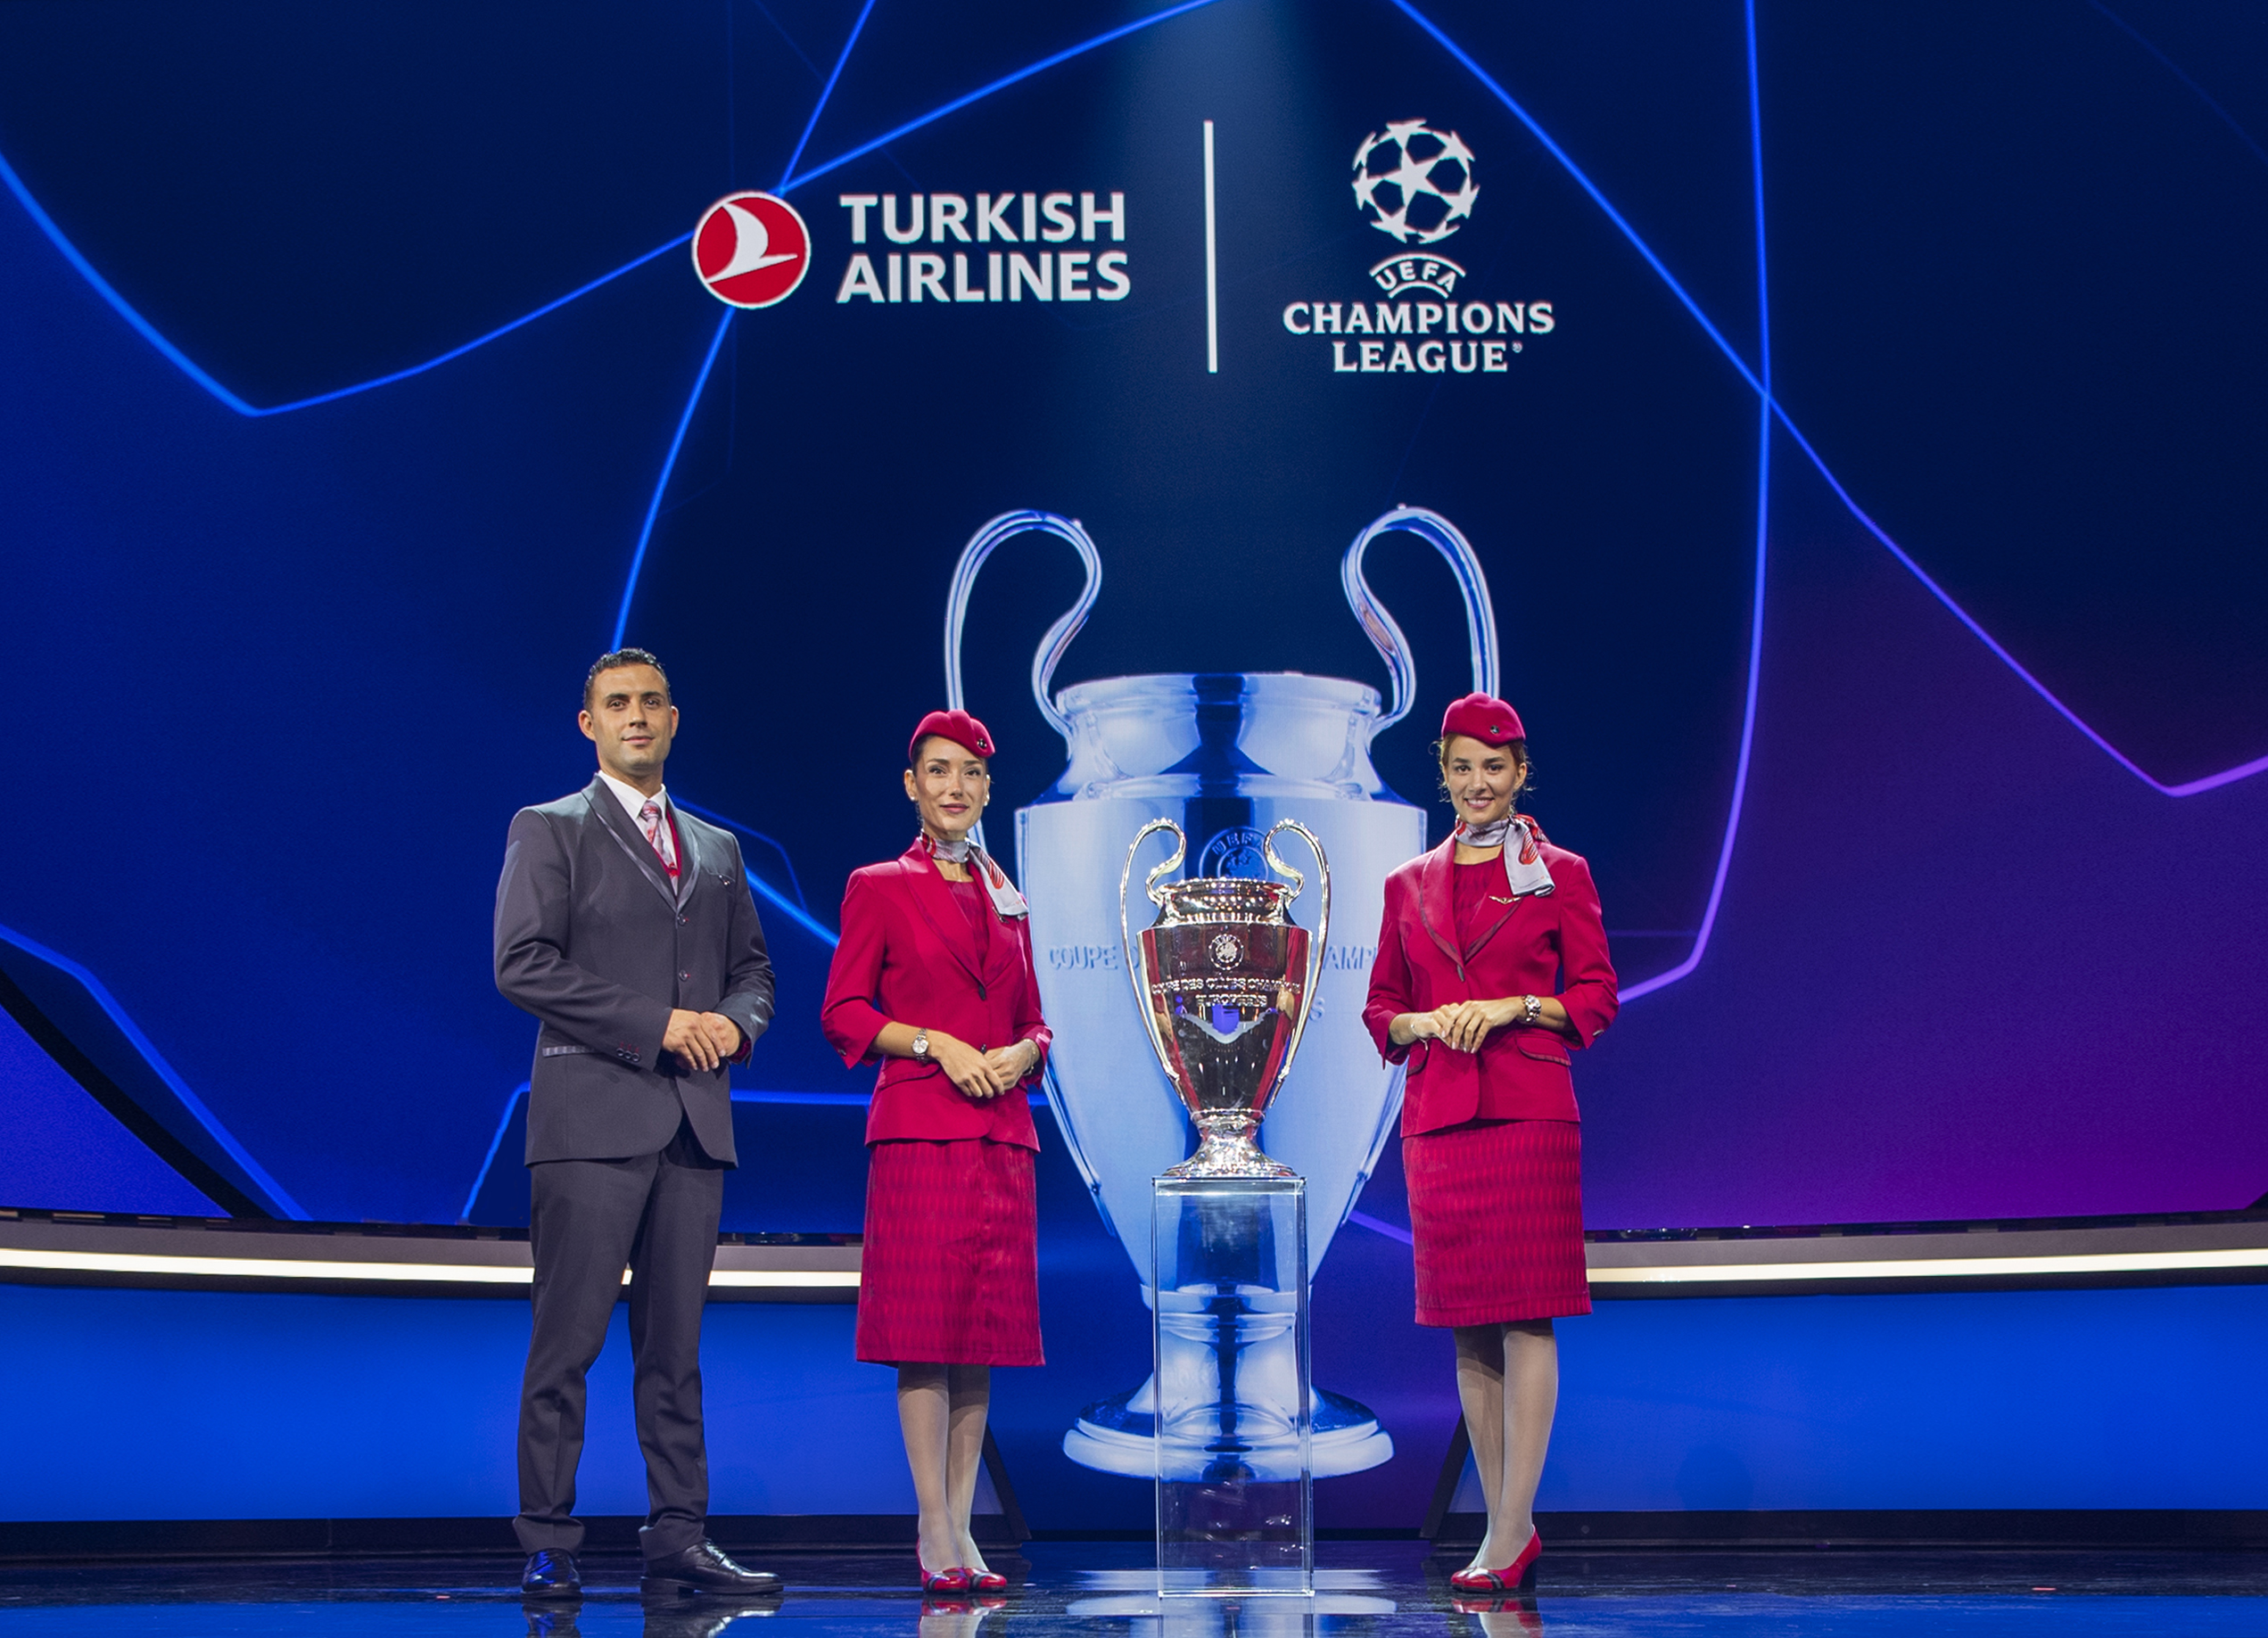 Turkish Airlines becomes official sponsor for UEFA Champions League